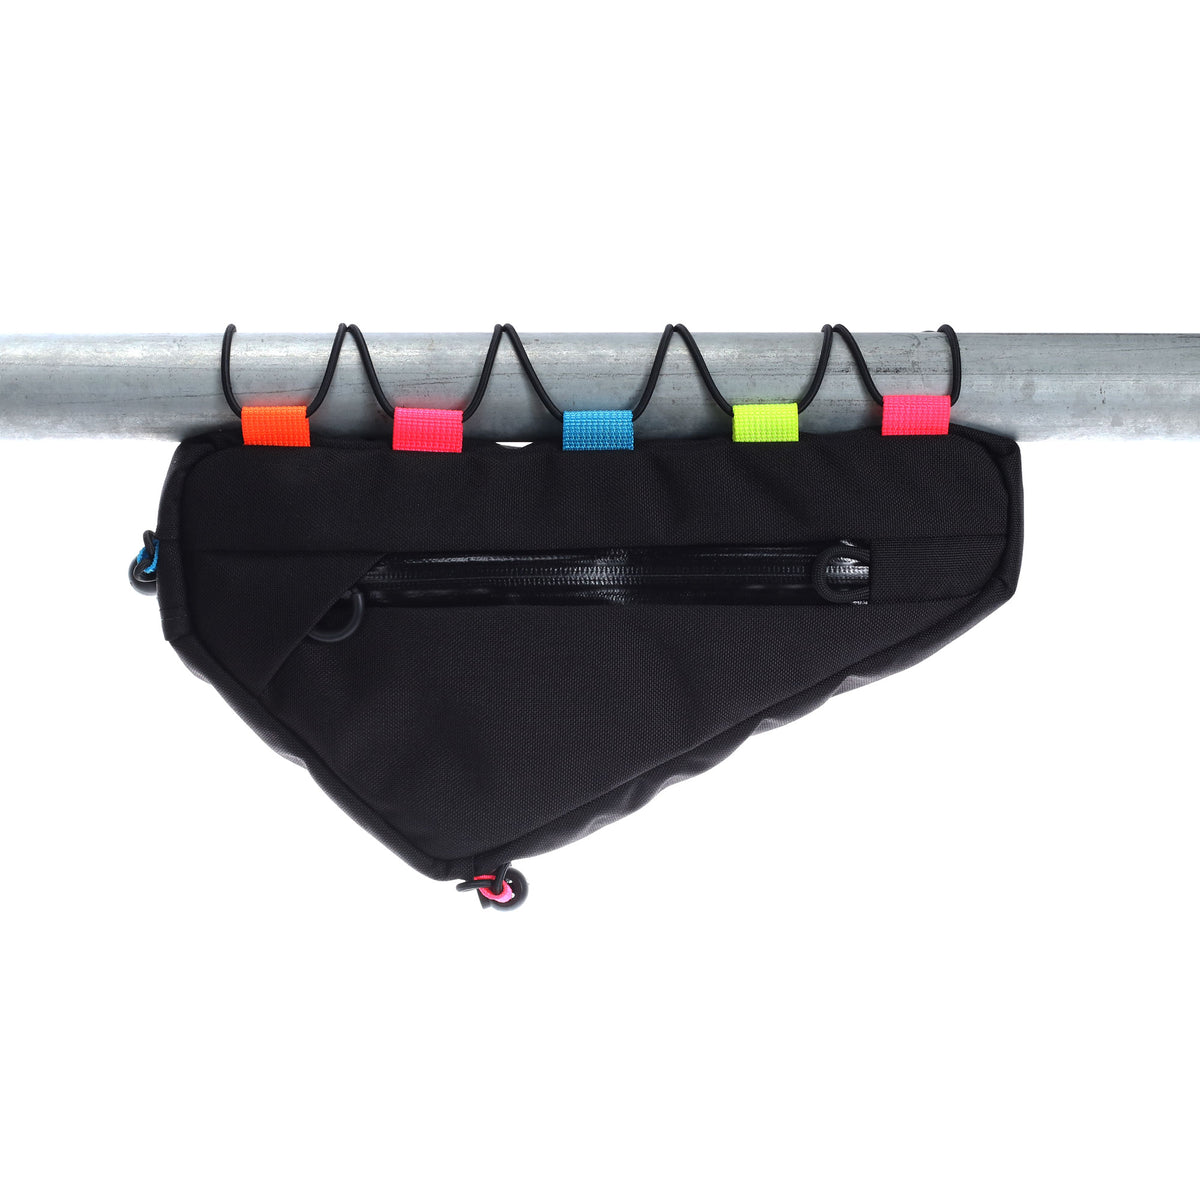 skingrowsback wedge cycling frame bag lace up neon